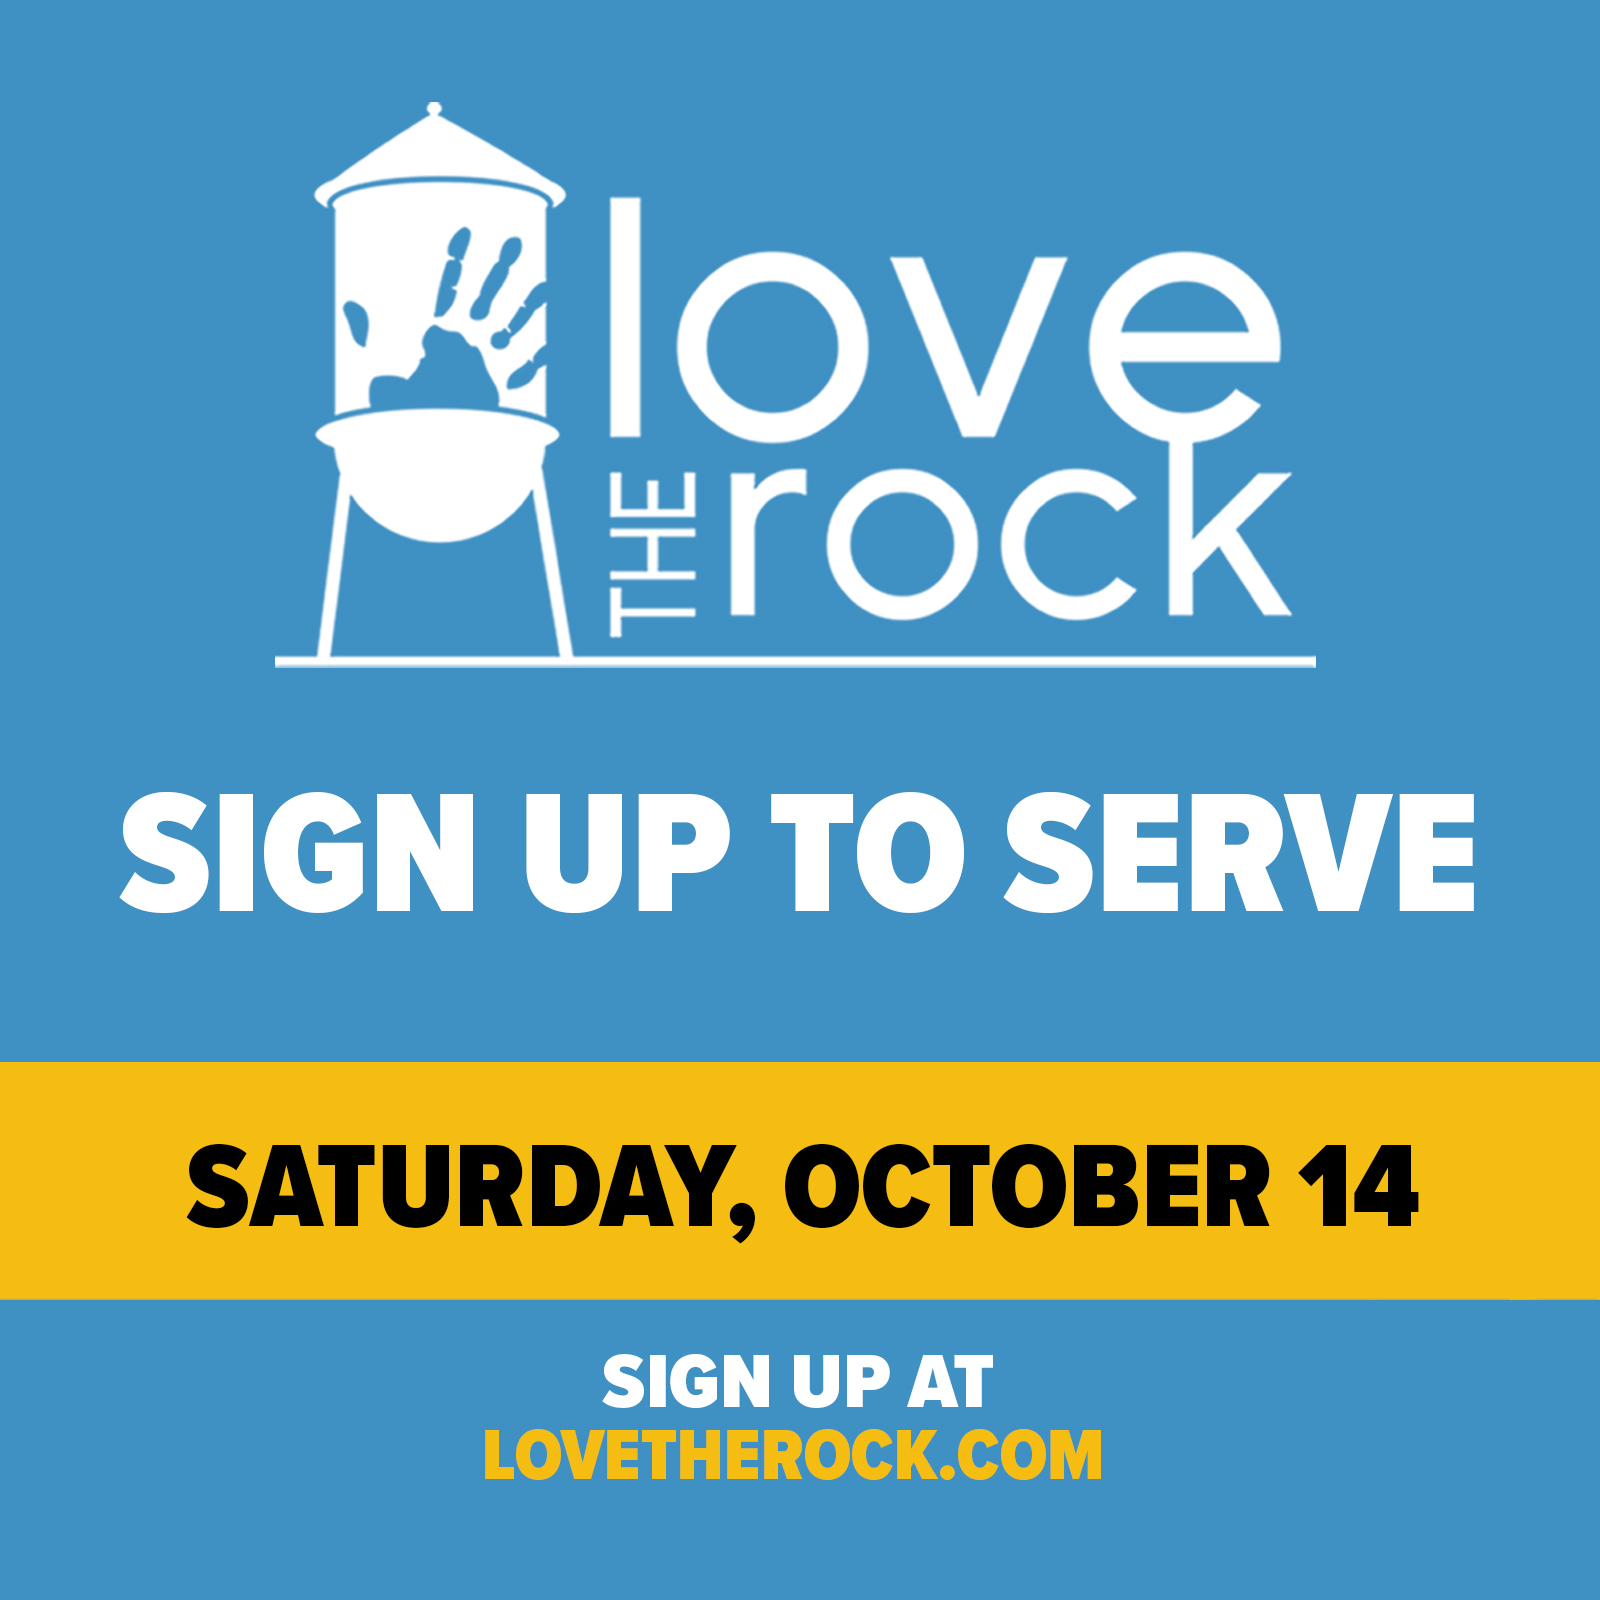 Sign up to serve